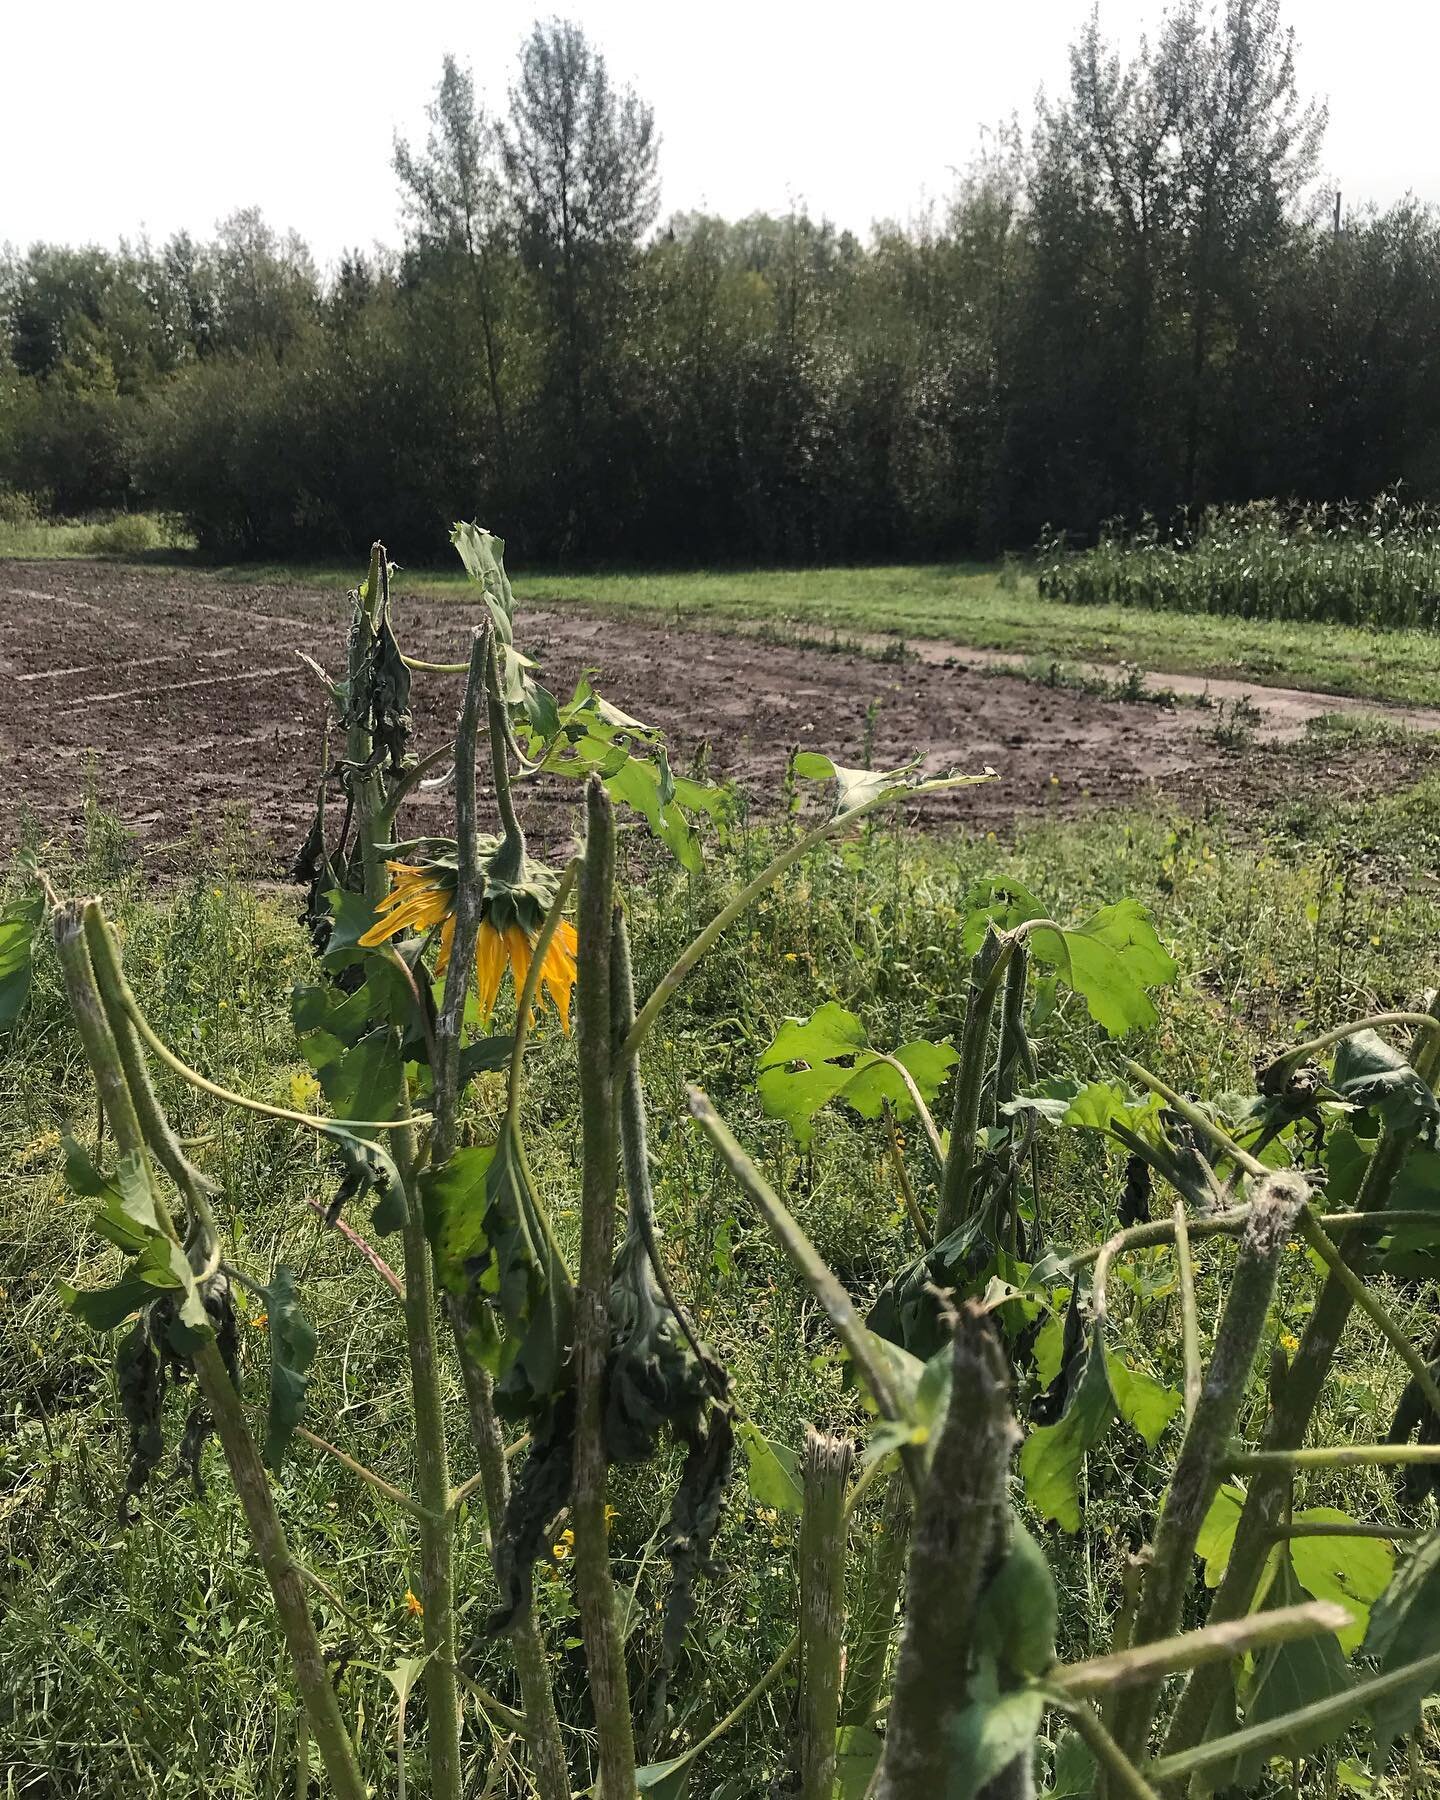 Sad news to share from the NGM Garden Club: last weekend we experienced some bad storm weather, including hail, which pummeled and shredded the entire garden 😓we are hoping that the root veggies underground stayed protected enough to survive, and th